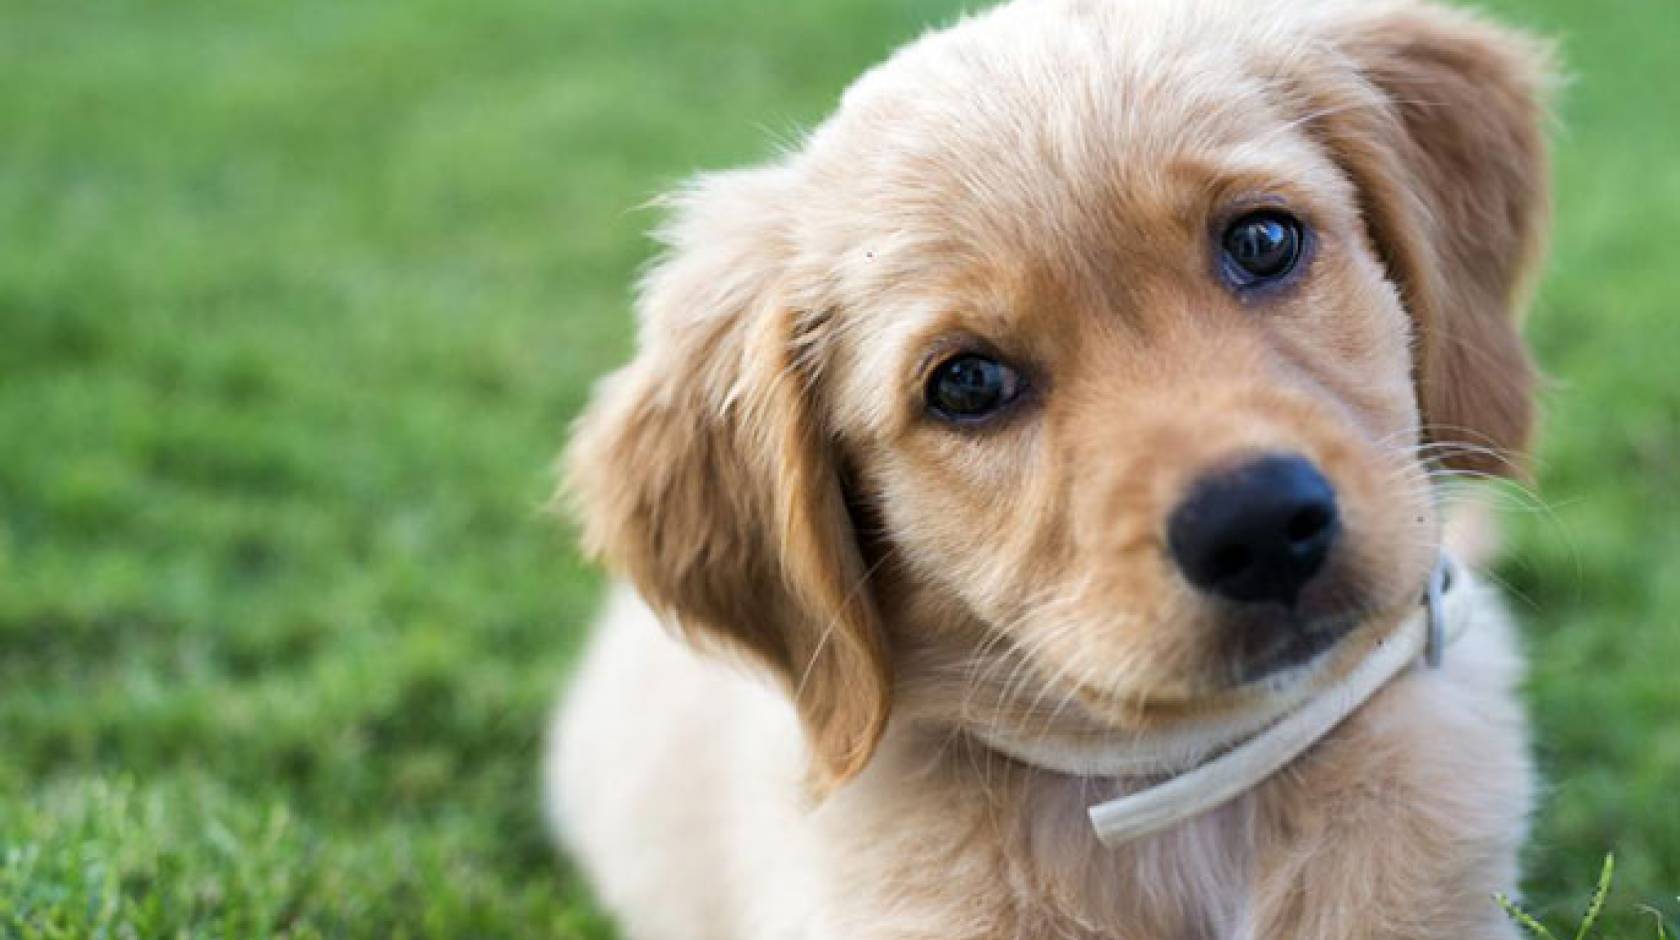 Golden retriever puppy looking winsomely at the camera